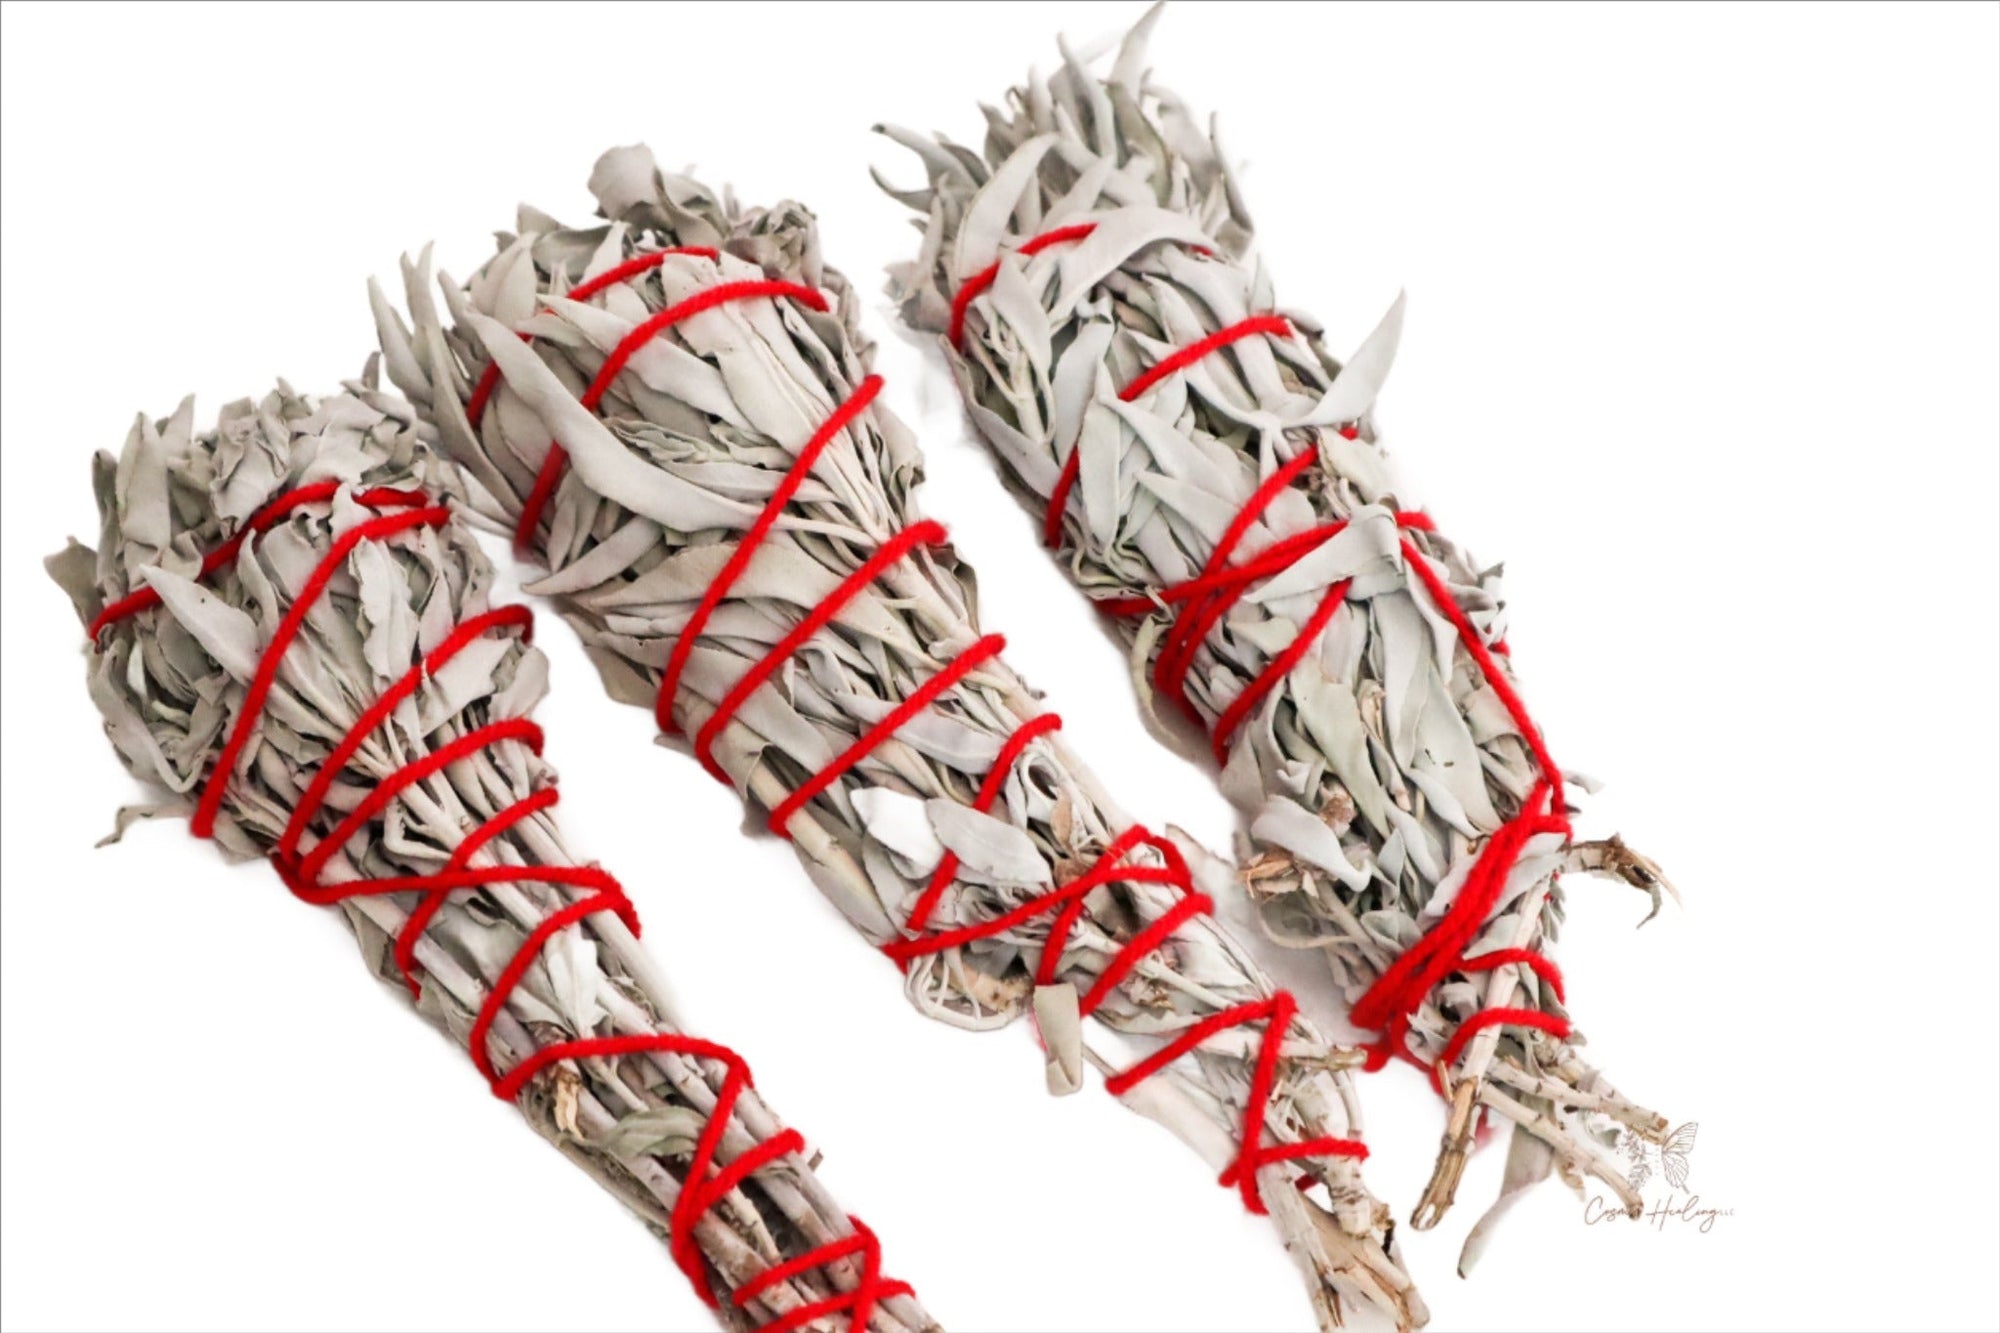 Extra Large Torch Style Mexican White Sage Bundle 9" to cleanse negative energy - Shop Cosmic Healing